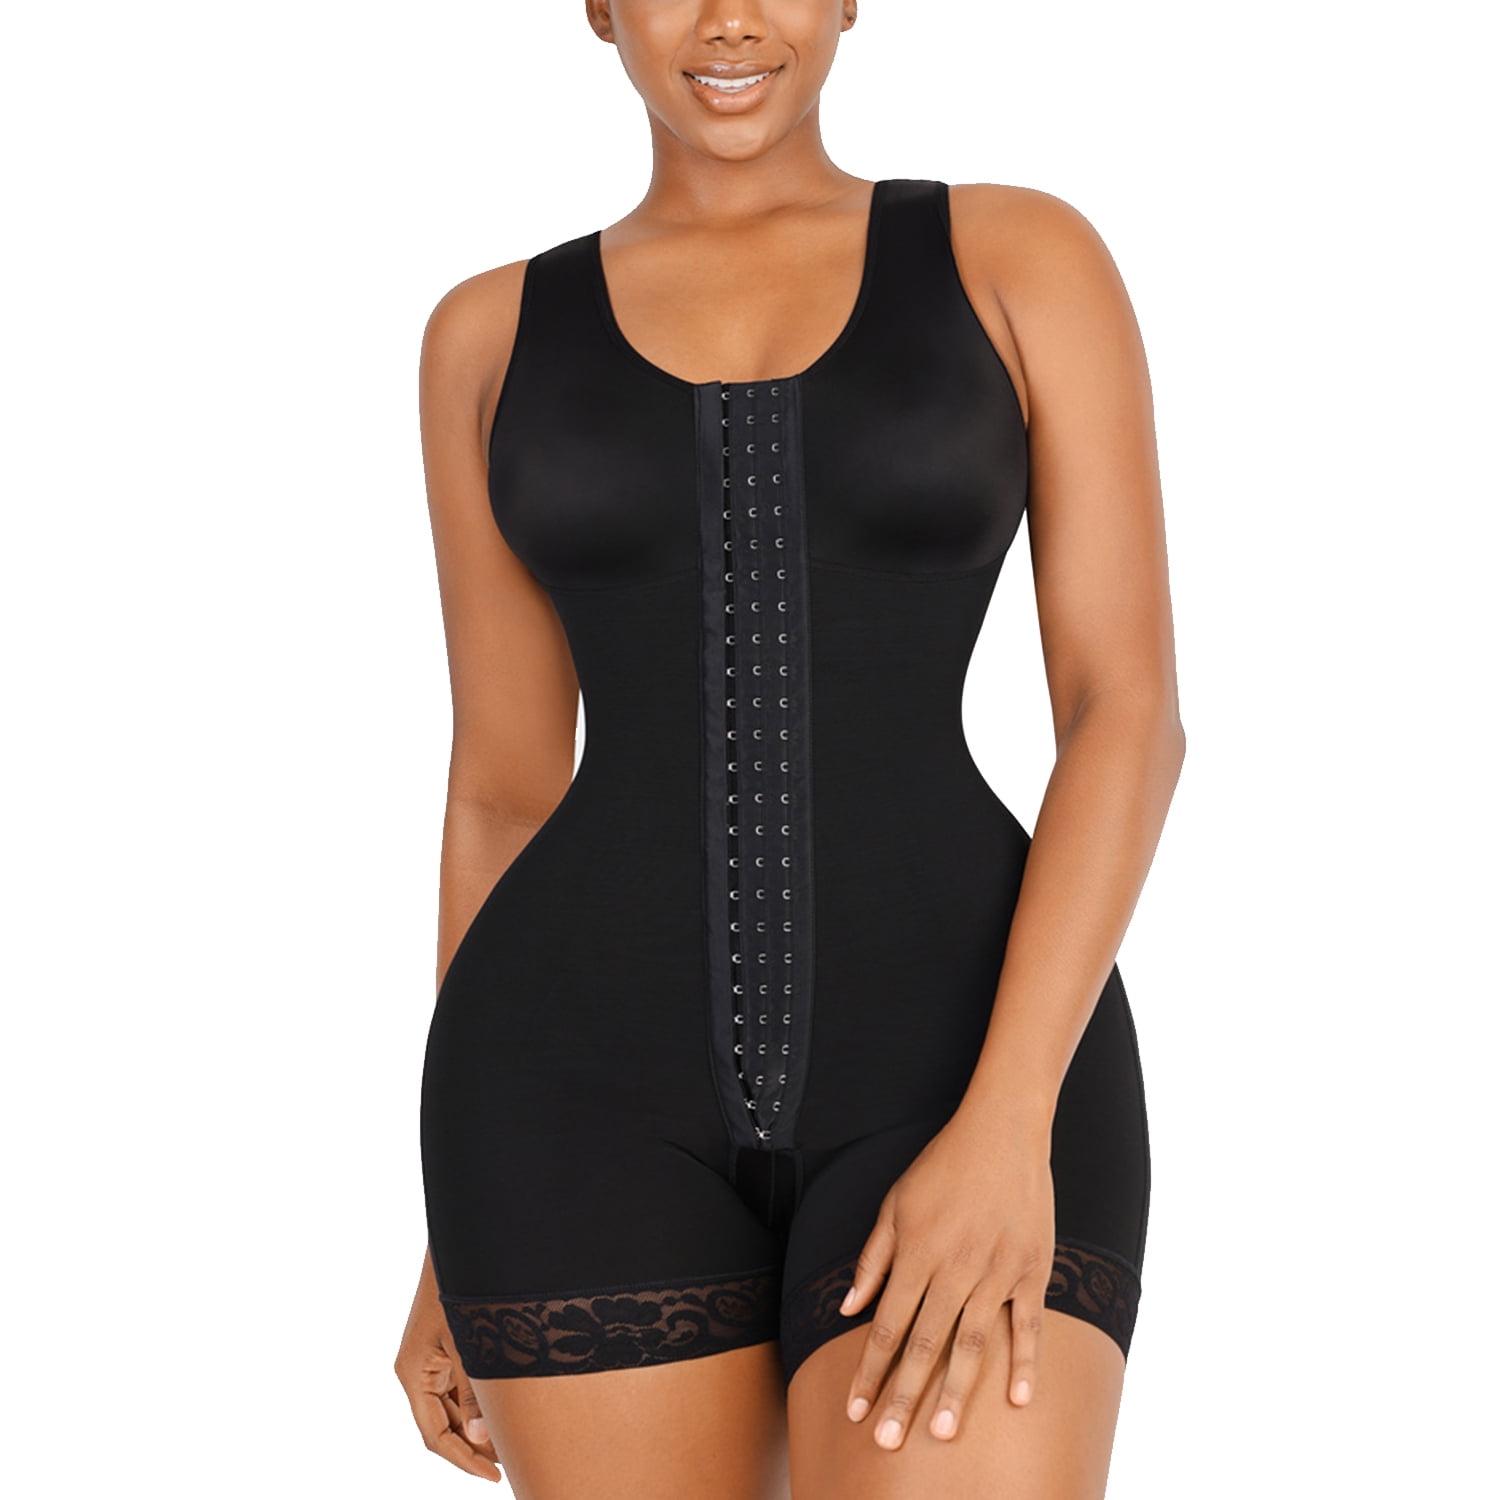 Fajas Salome 0217, Mid Thigh Firm Compression Full Body Shaper for Women, Butt Lifter Open Bust Postpartum Bodysuit